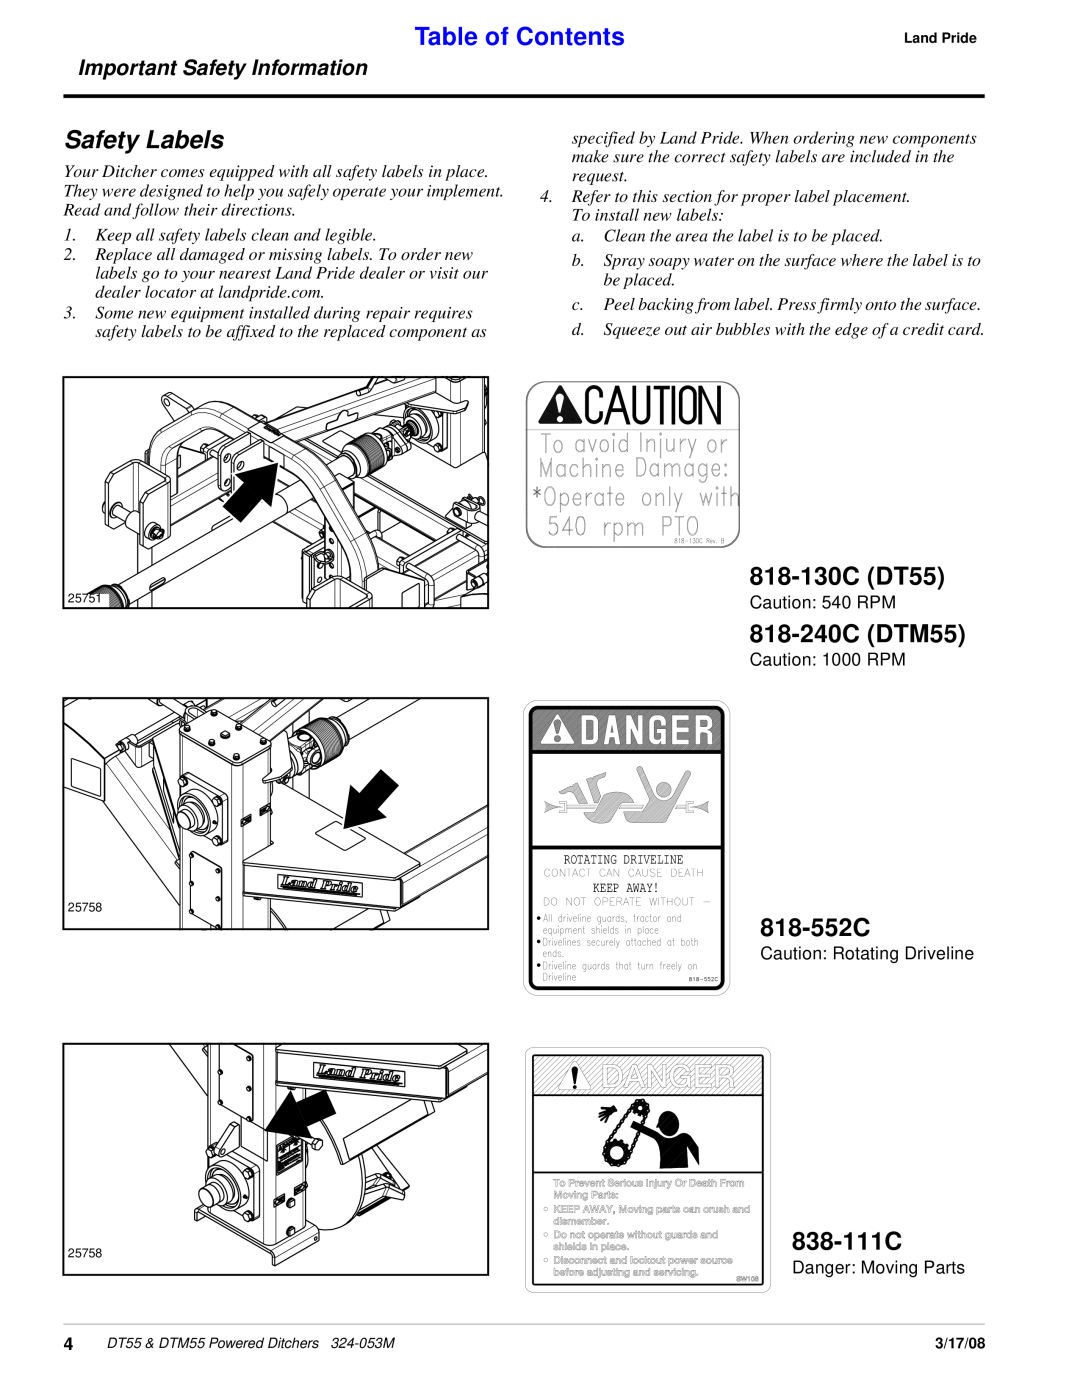 Land Pride DTM55 Safety Labels, 838-111C, Table of Contents, Important Safety Information, Danger: Moving Parts, 324-053M 